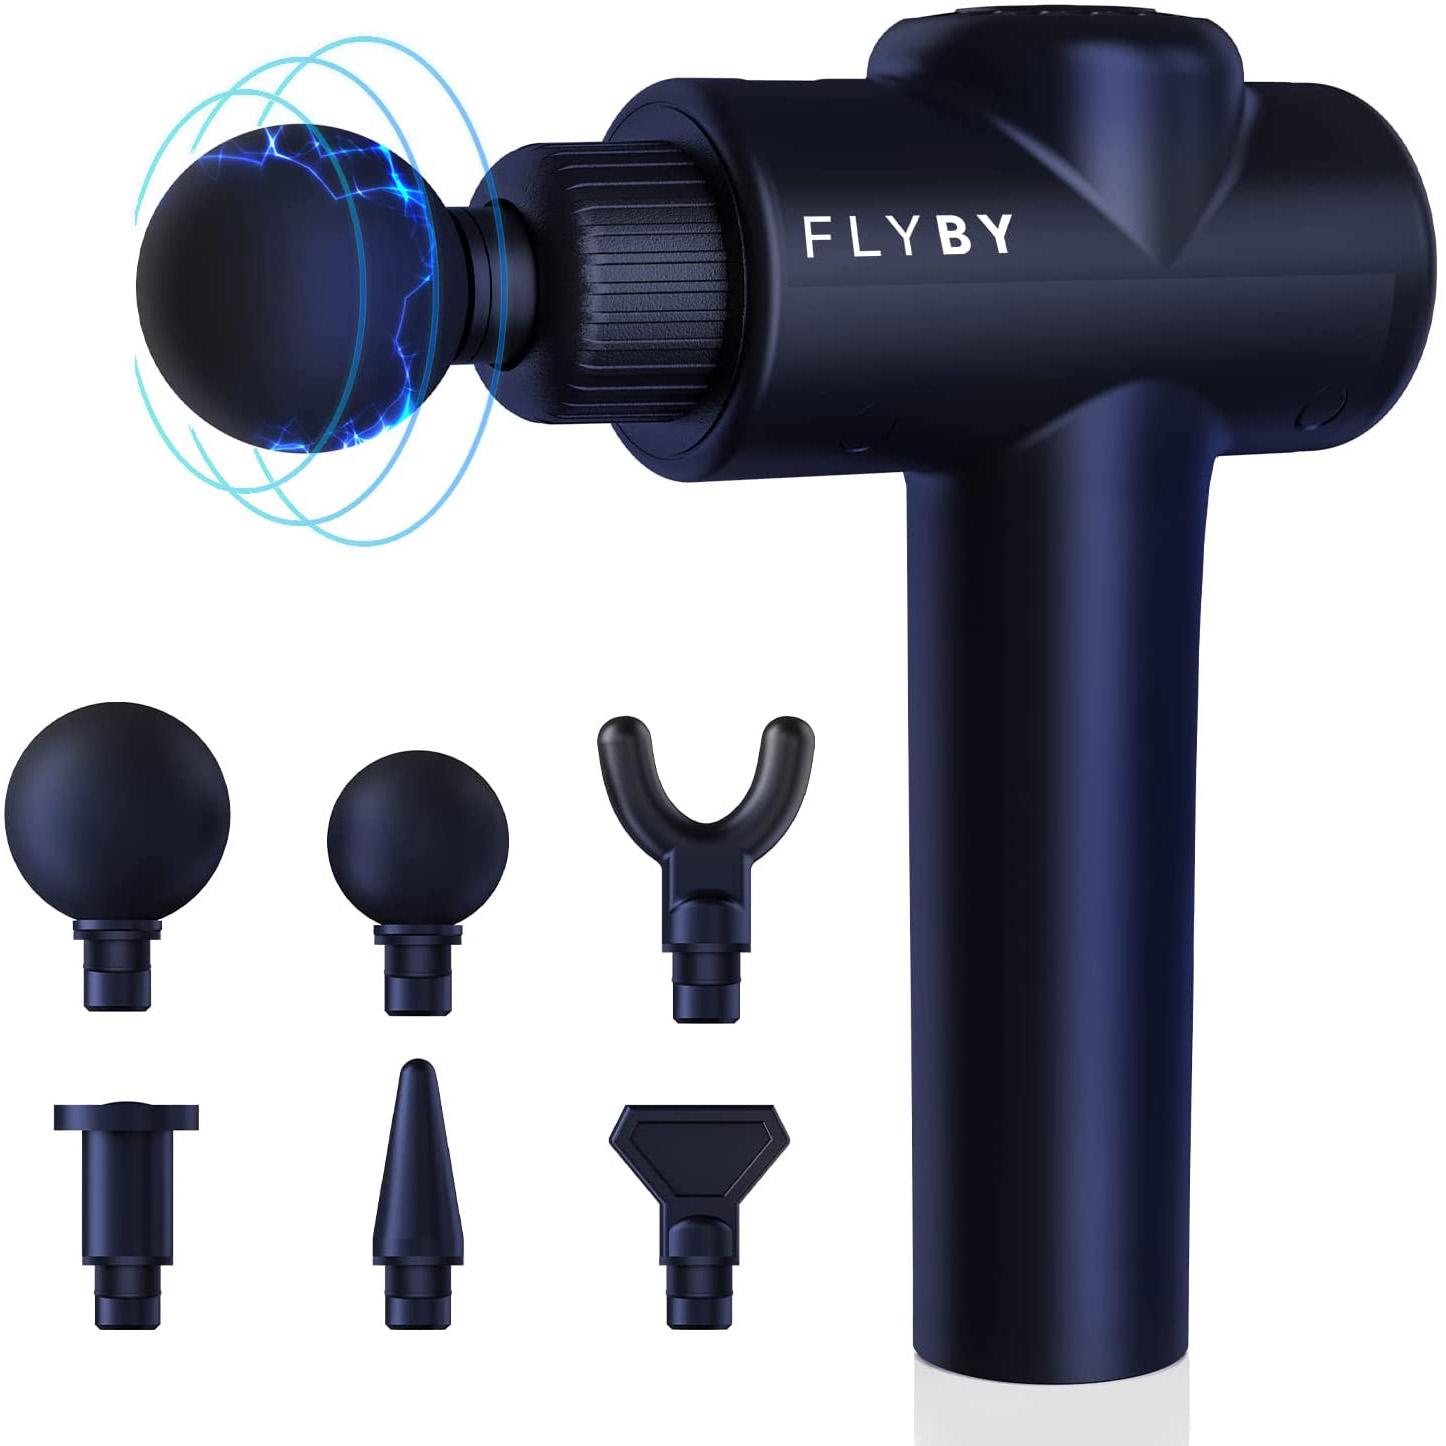 Flyby F1Pro Percussion Massage Gun for $33.73 Shipped